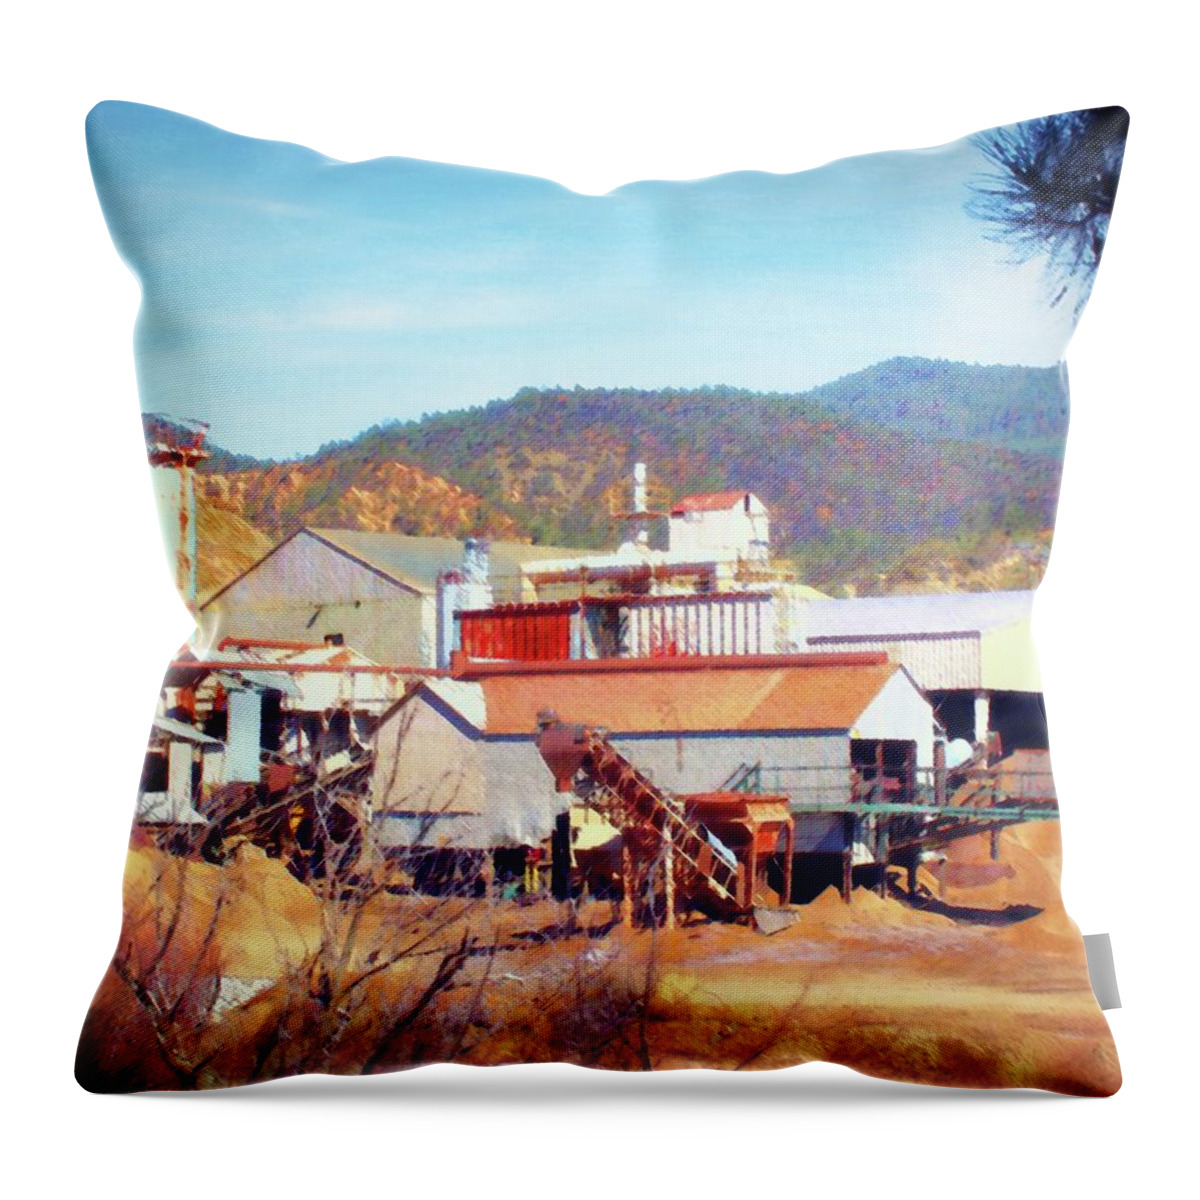 Mine Throw Pillow featuring the photograph Aggregate Mine by Timothy Bulone